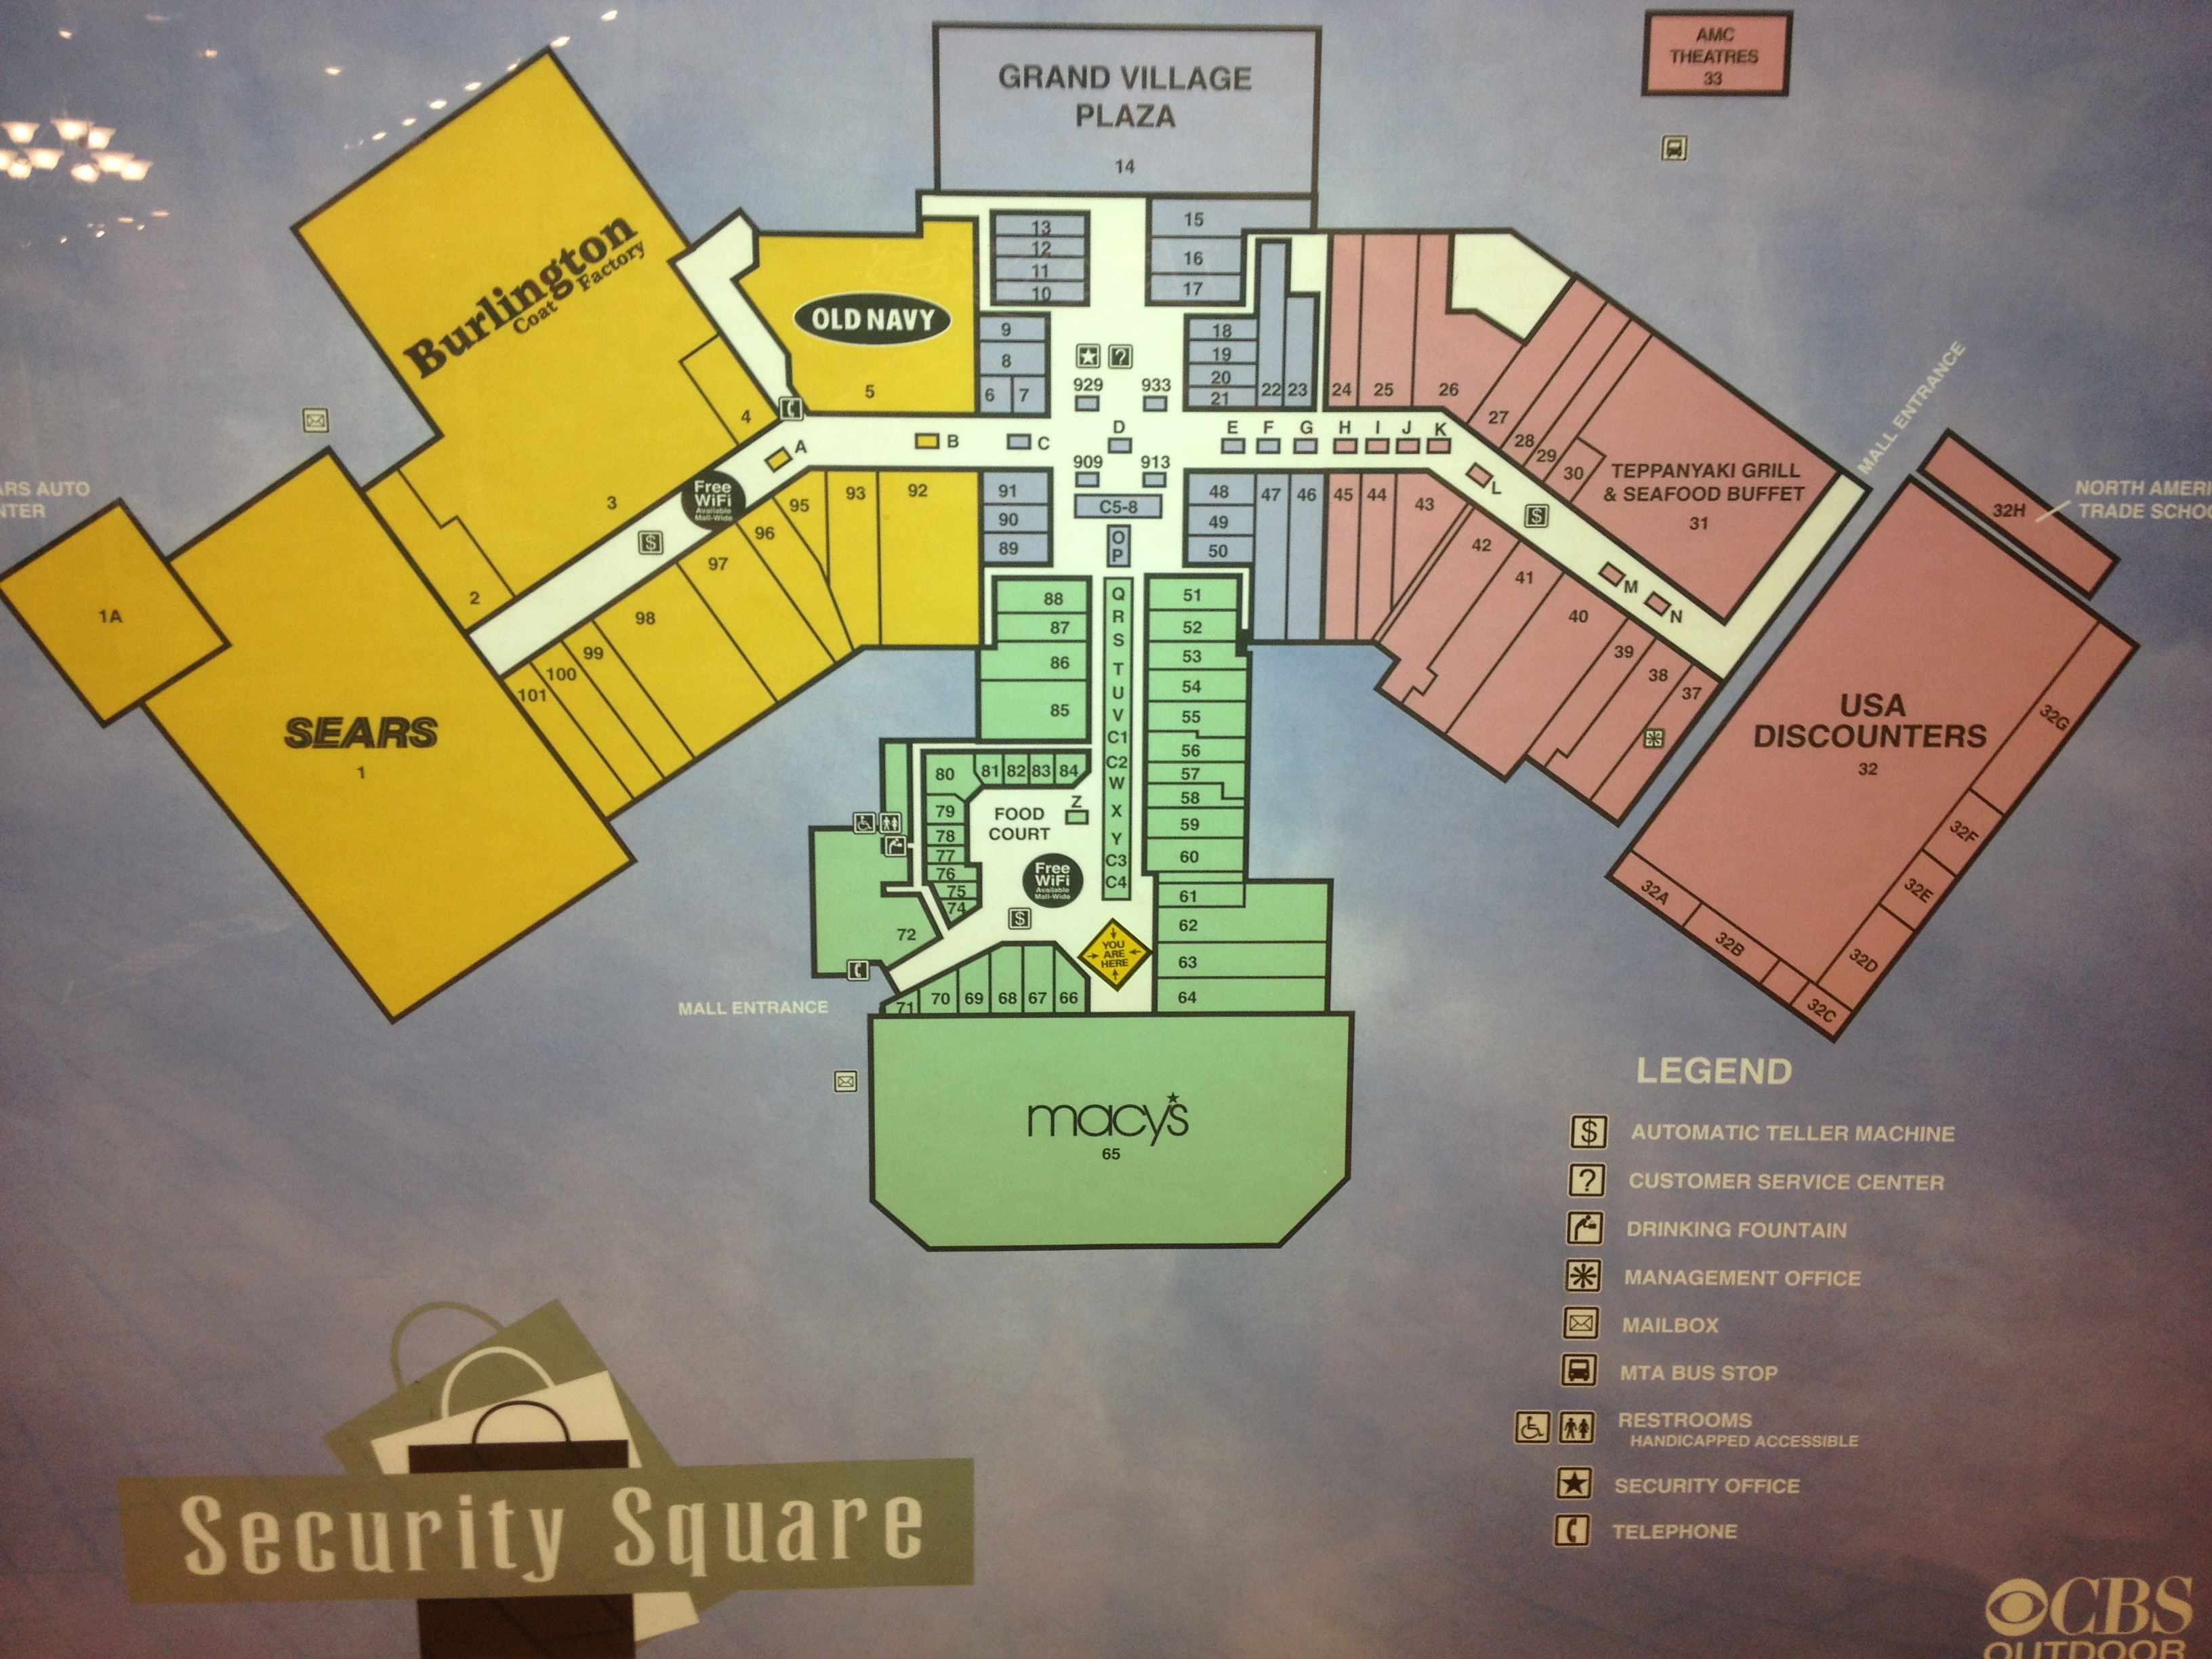 Security Square Mall Directory